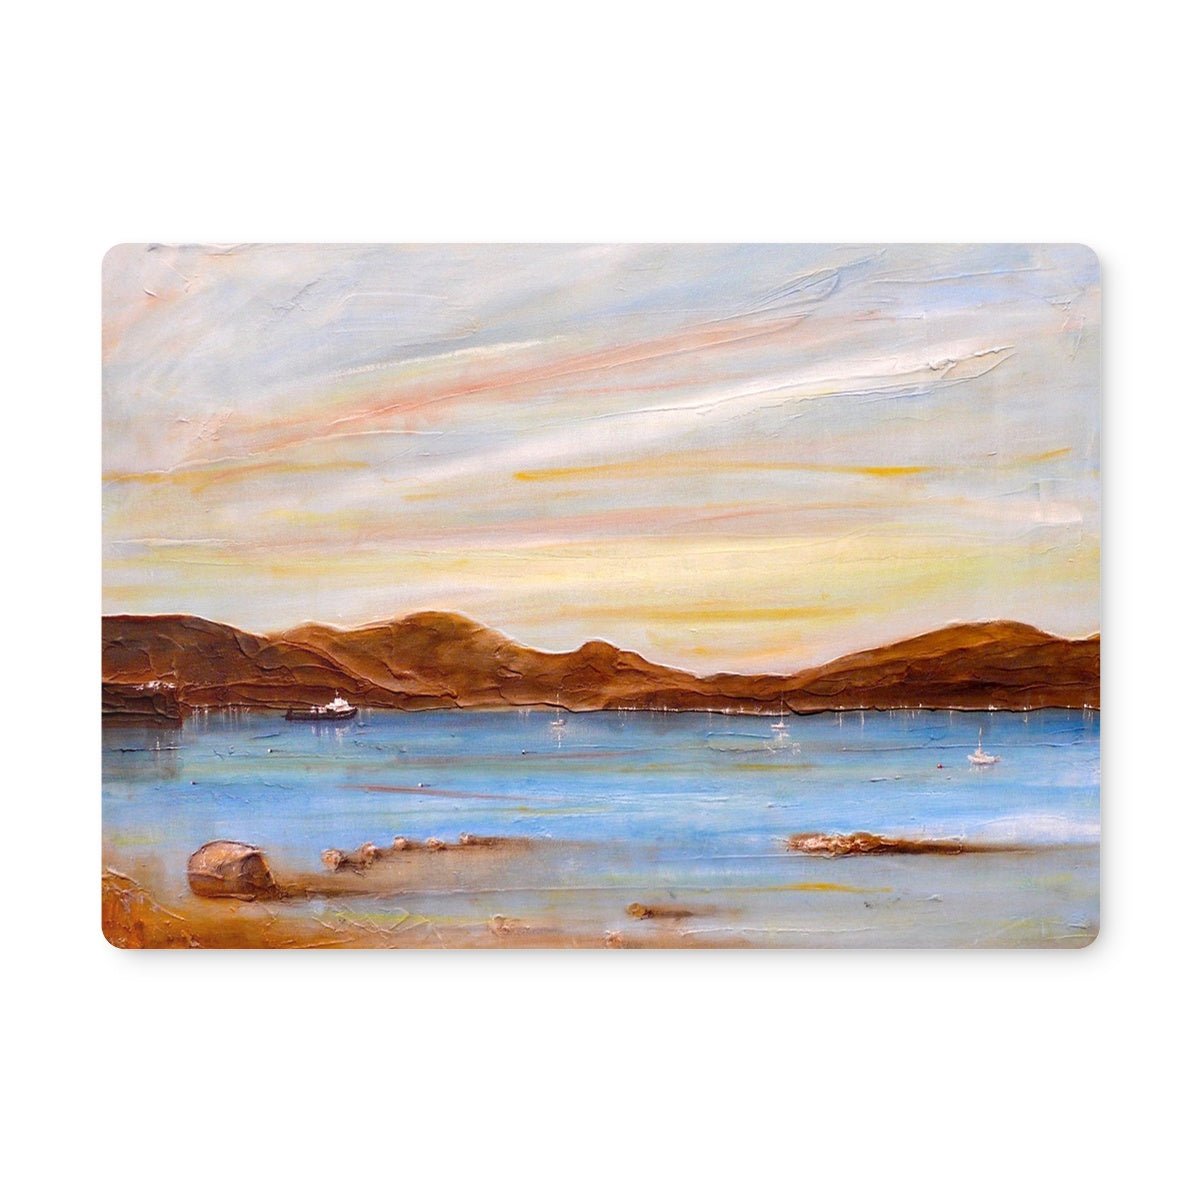 The Last Ferry To Dunoon Art Gifts Placemat-Placemats-River Clyde Art Gallery-4 Placemats-Paintings, Prints, Homeware, Art Gifts From Scotland By Scottish Artist Kevin Hunter